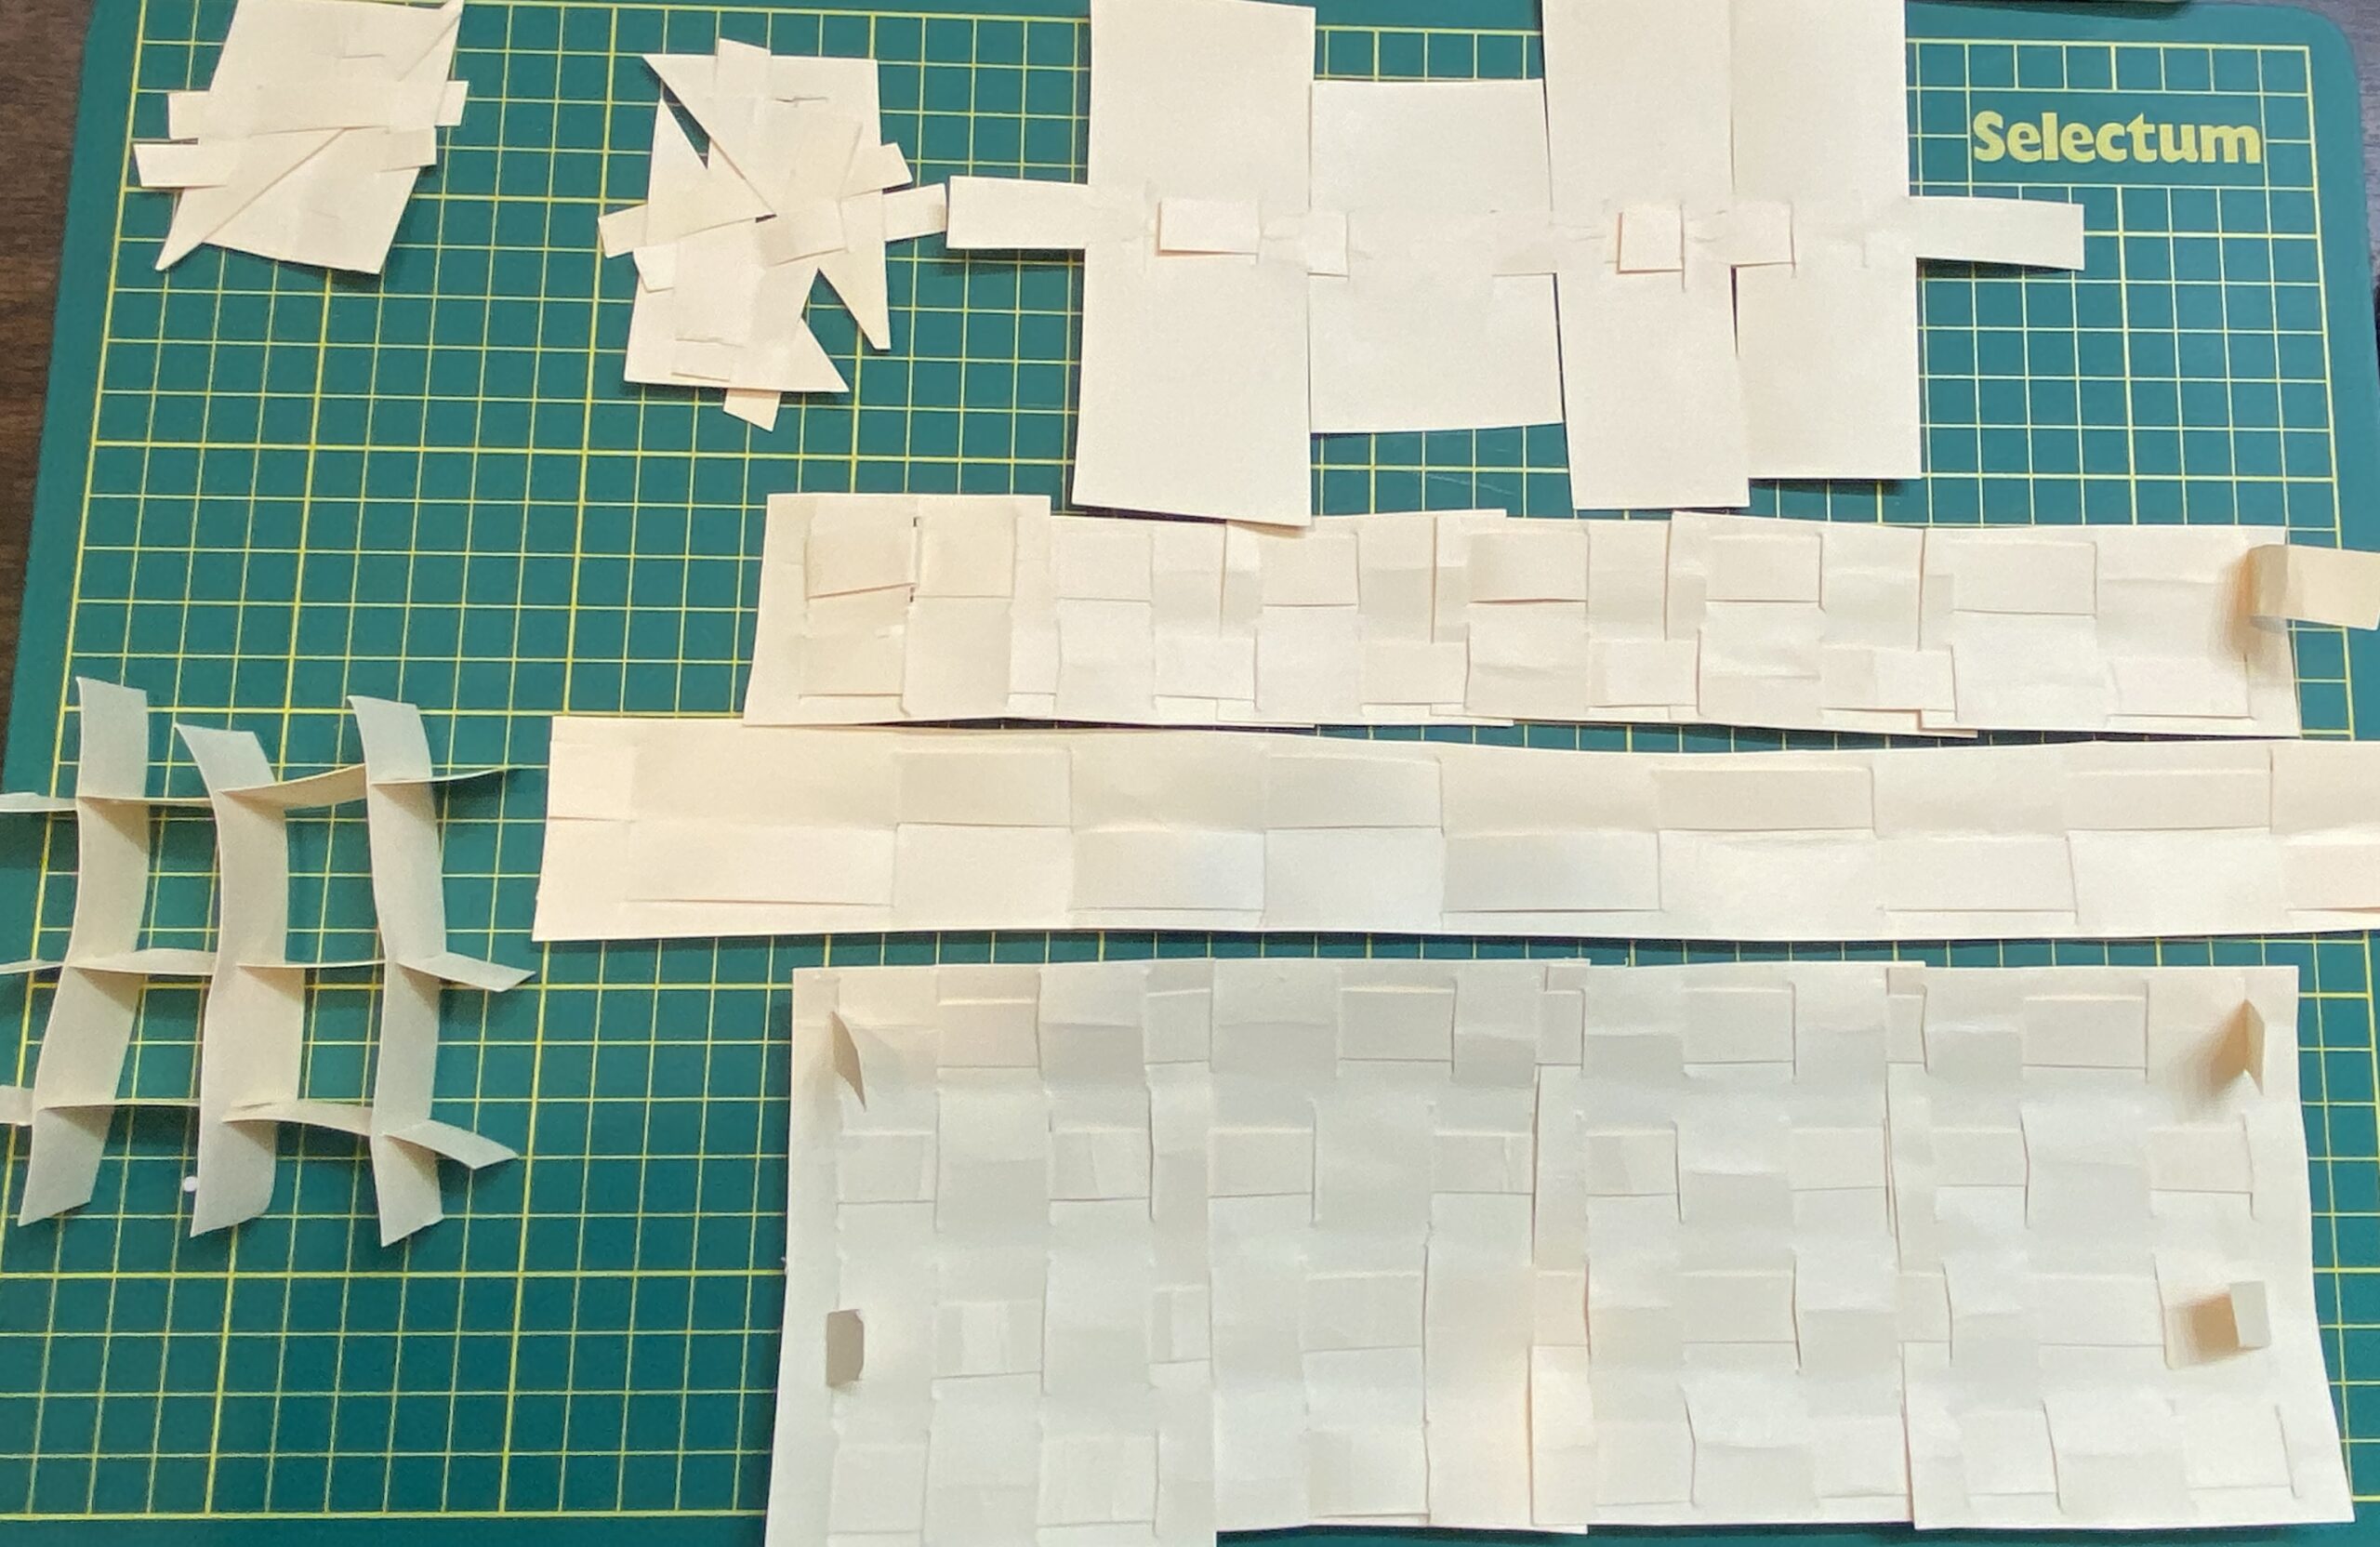 Preliminary paper structure to test weaving patterns with slits and strips